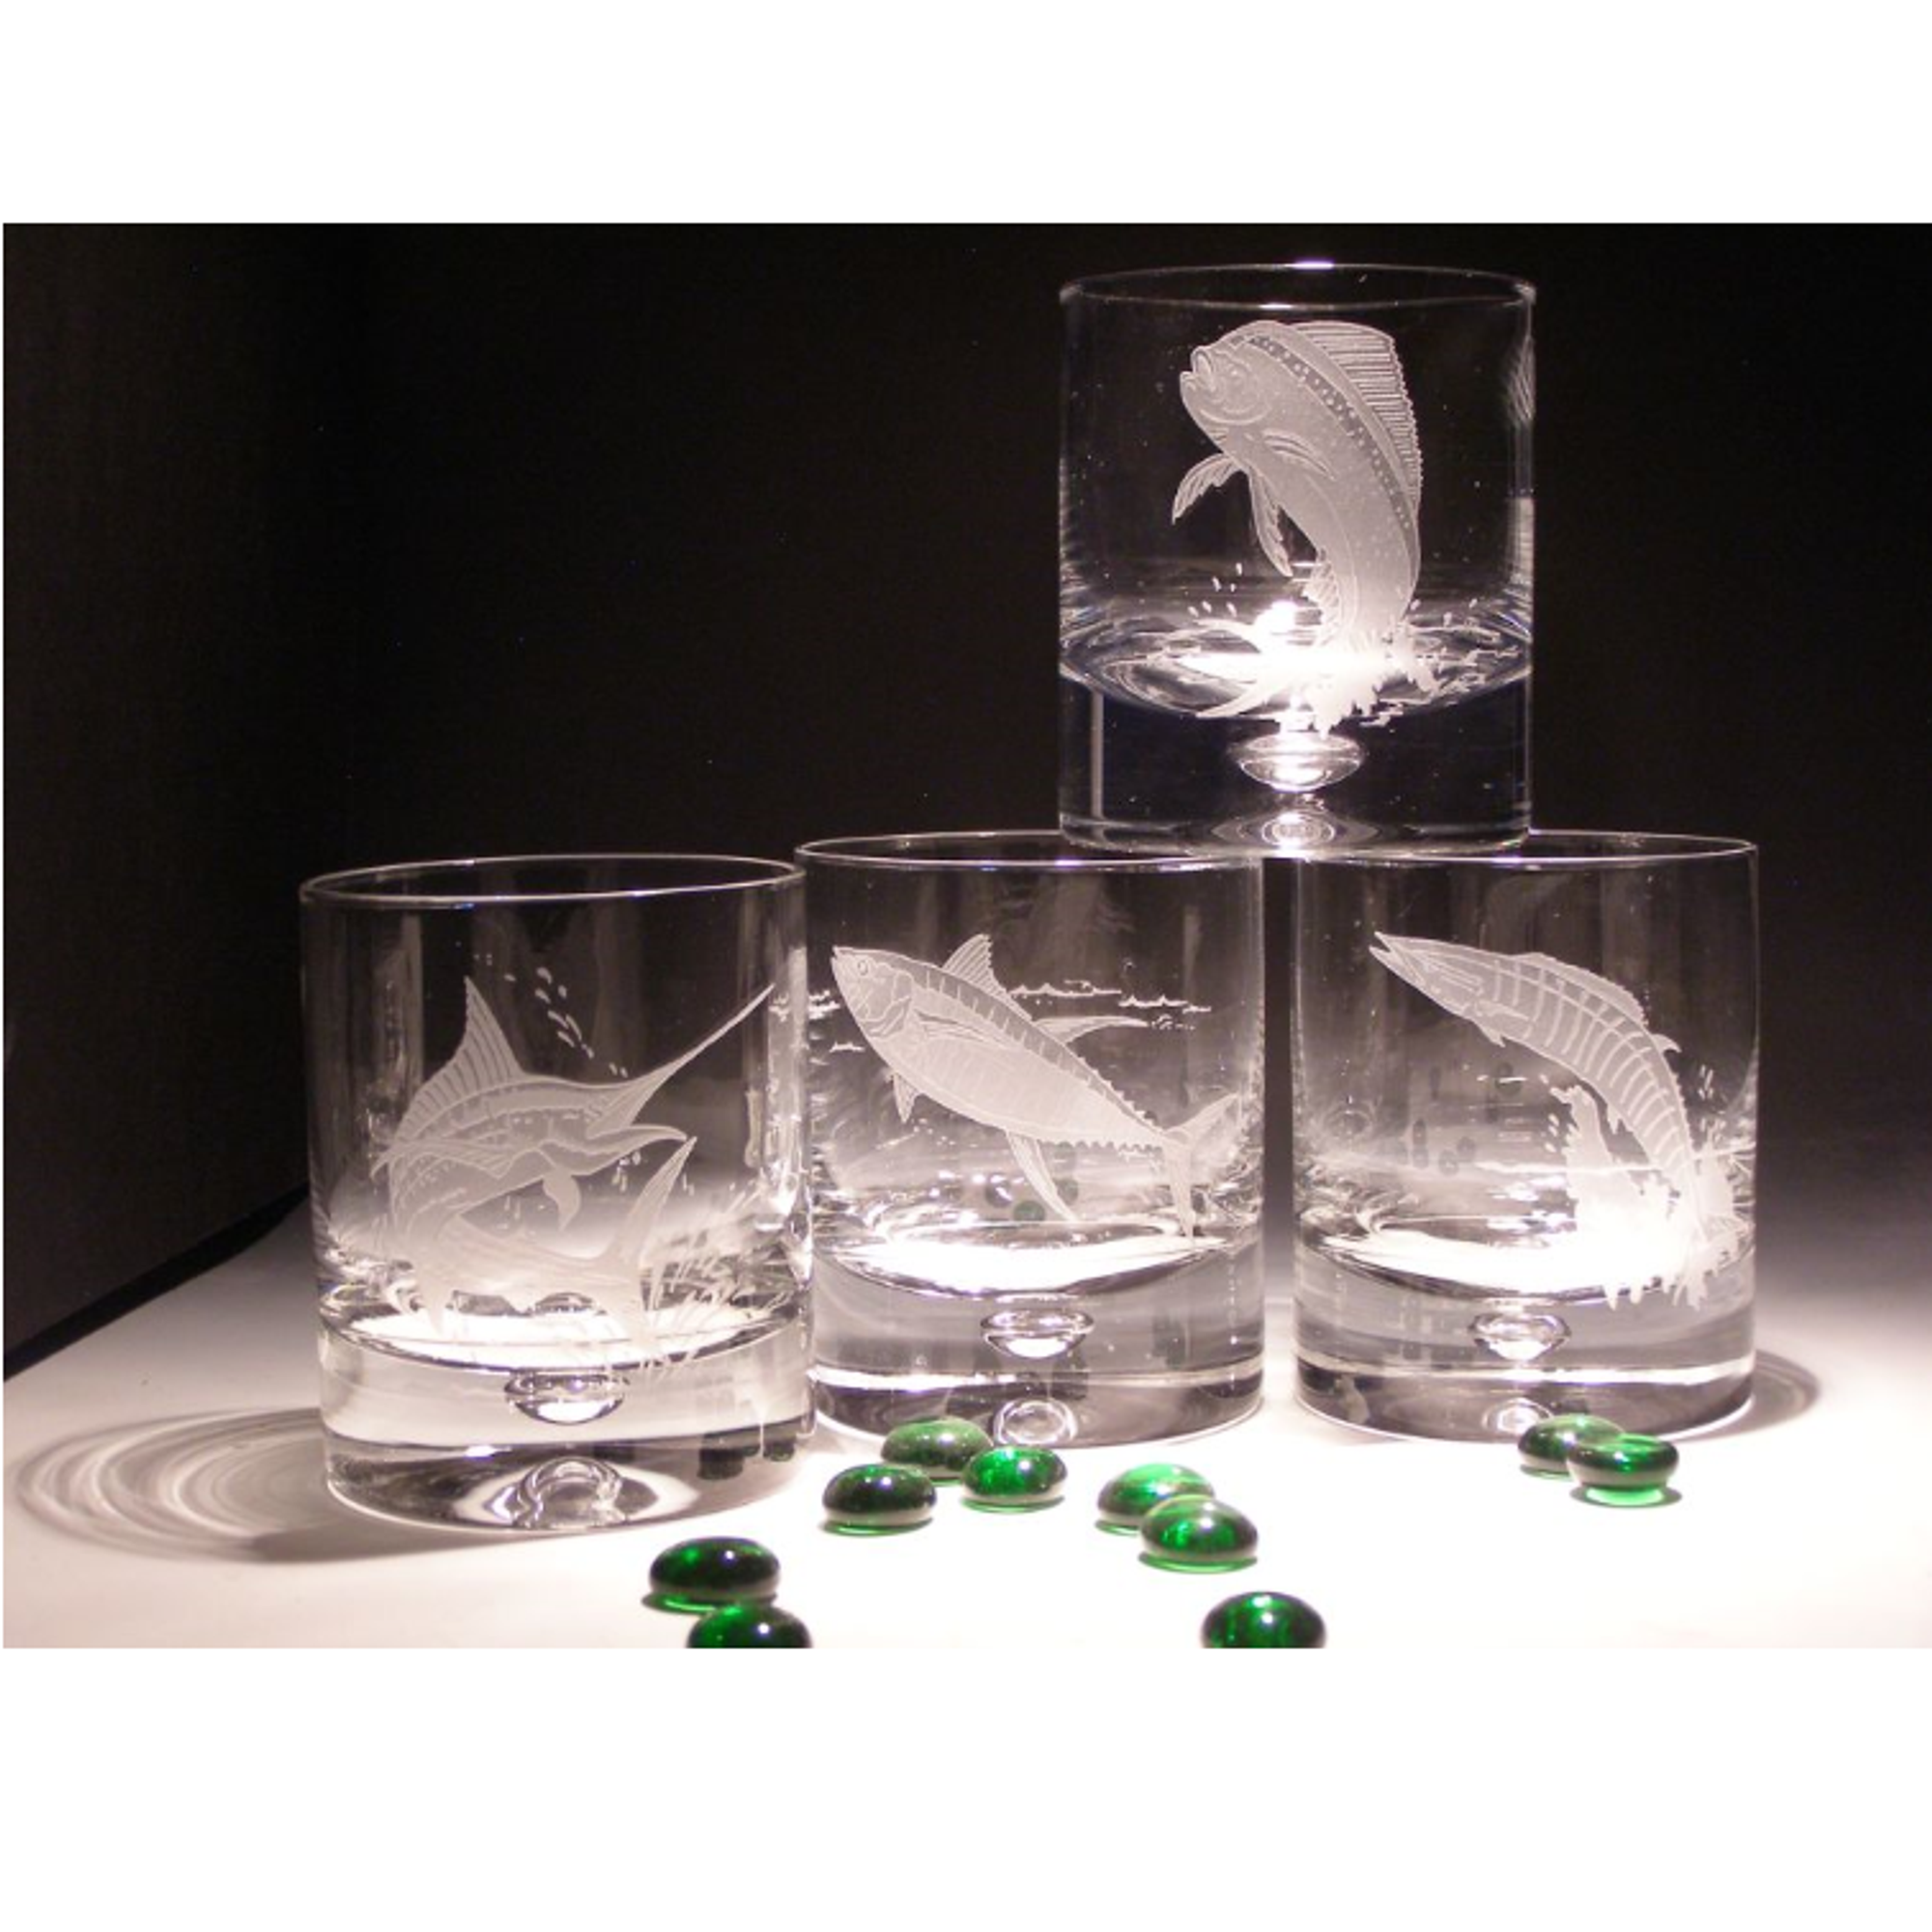 4 Gorgeous Vintage Etched Glass Butterfly High Ball Drinking Glasses 